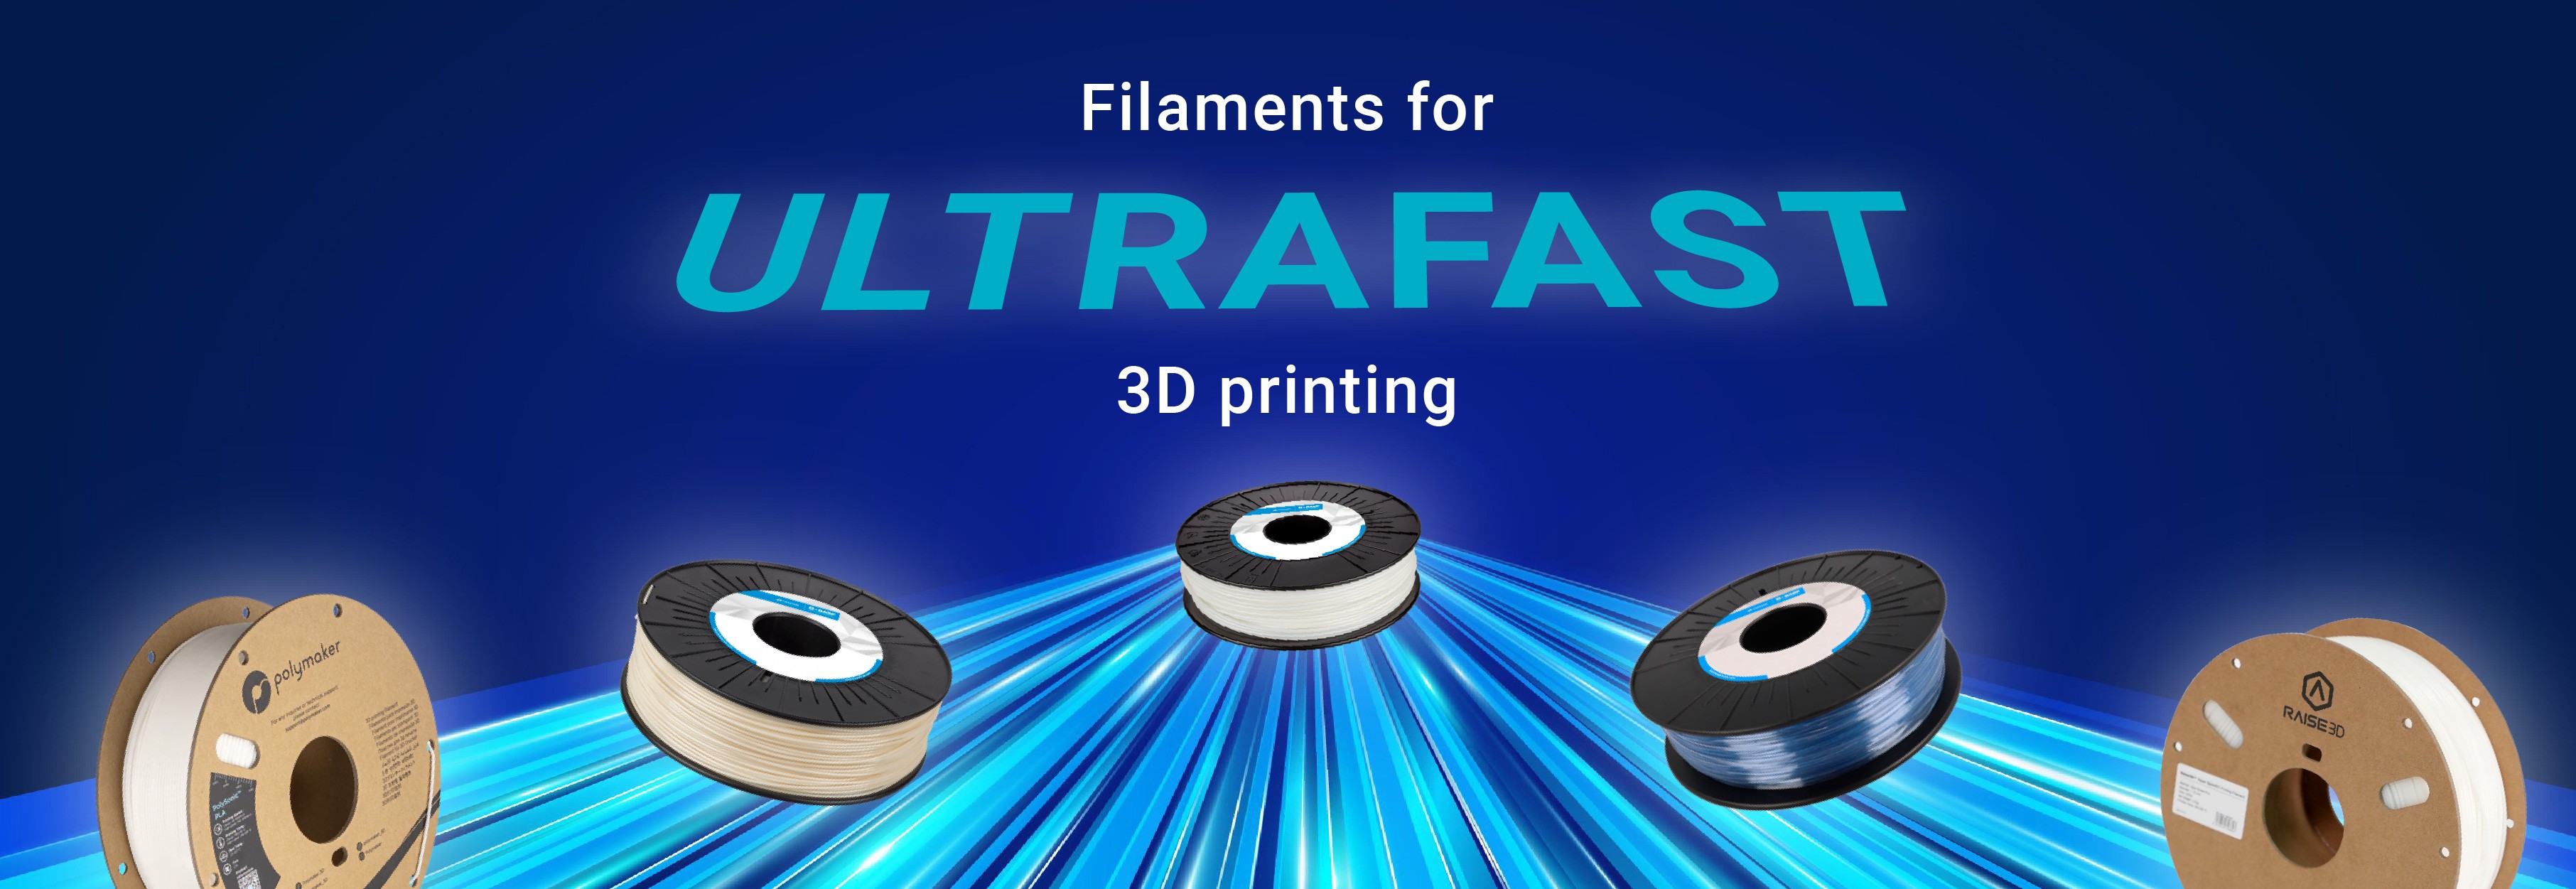 Filaments for ultrafast 3D printing